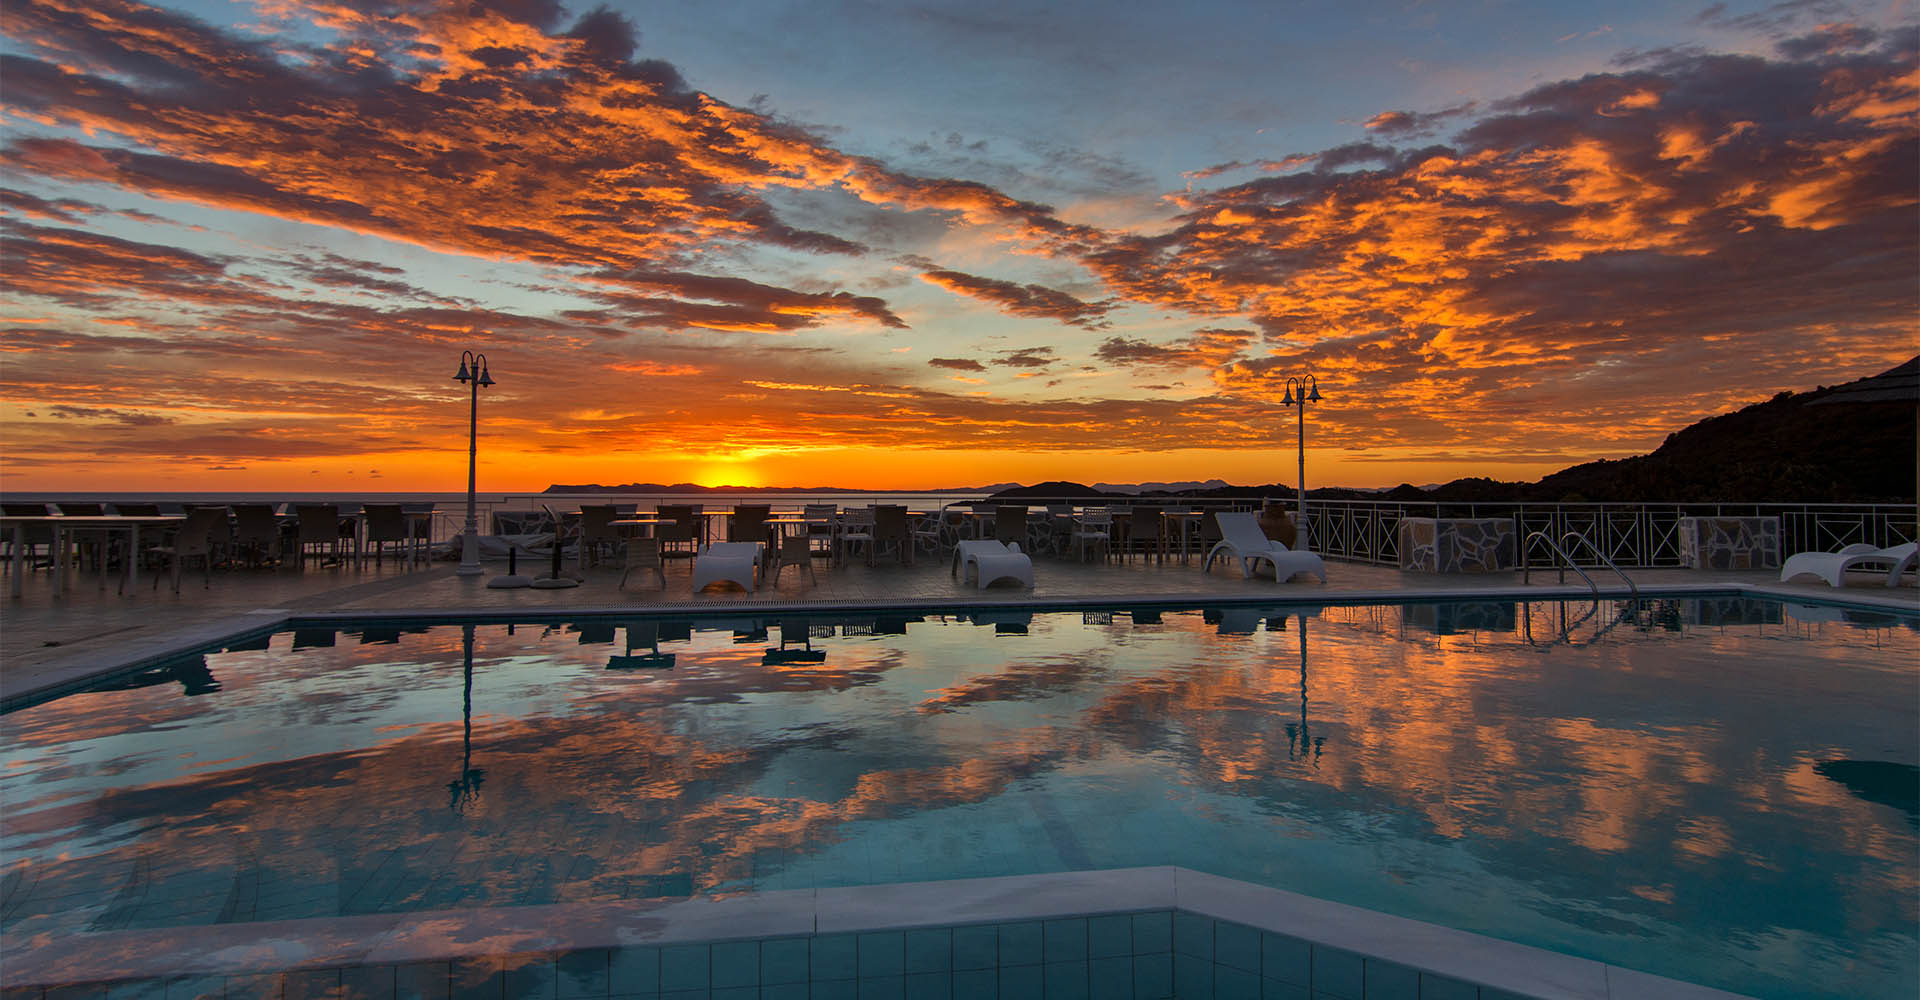 Magical sunsets at the pool